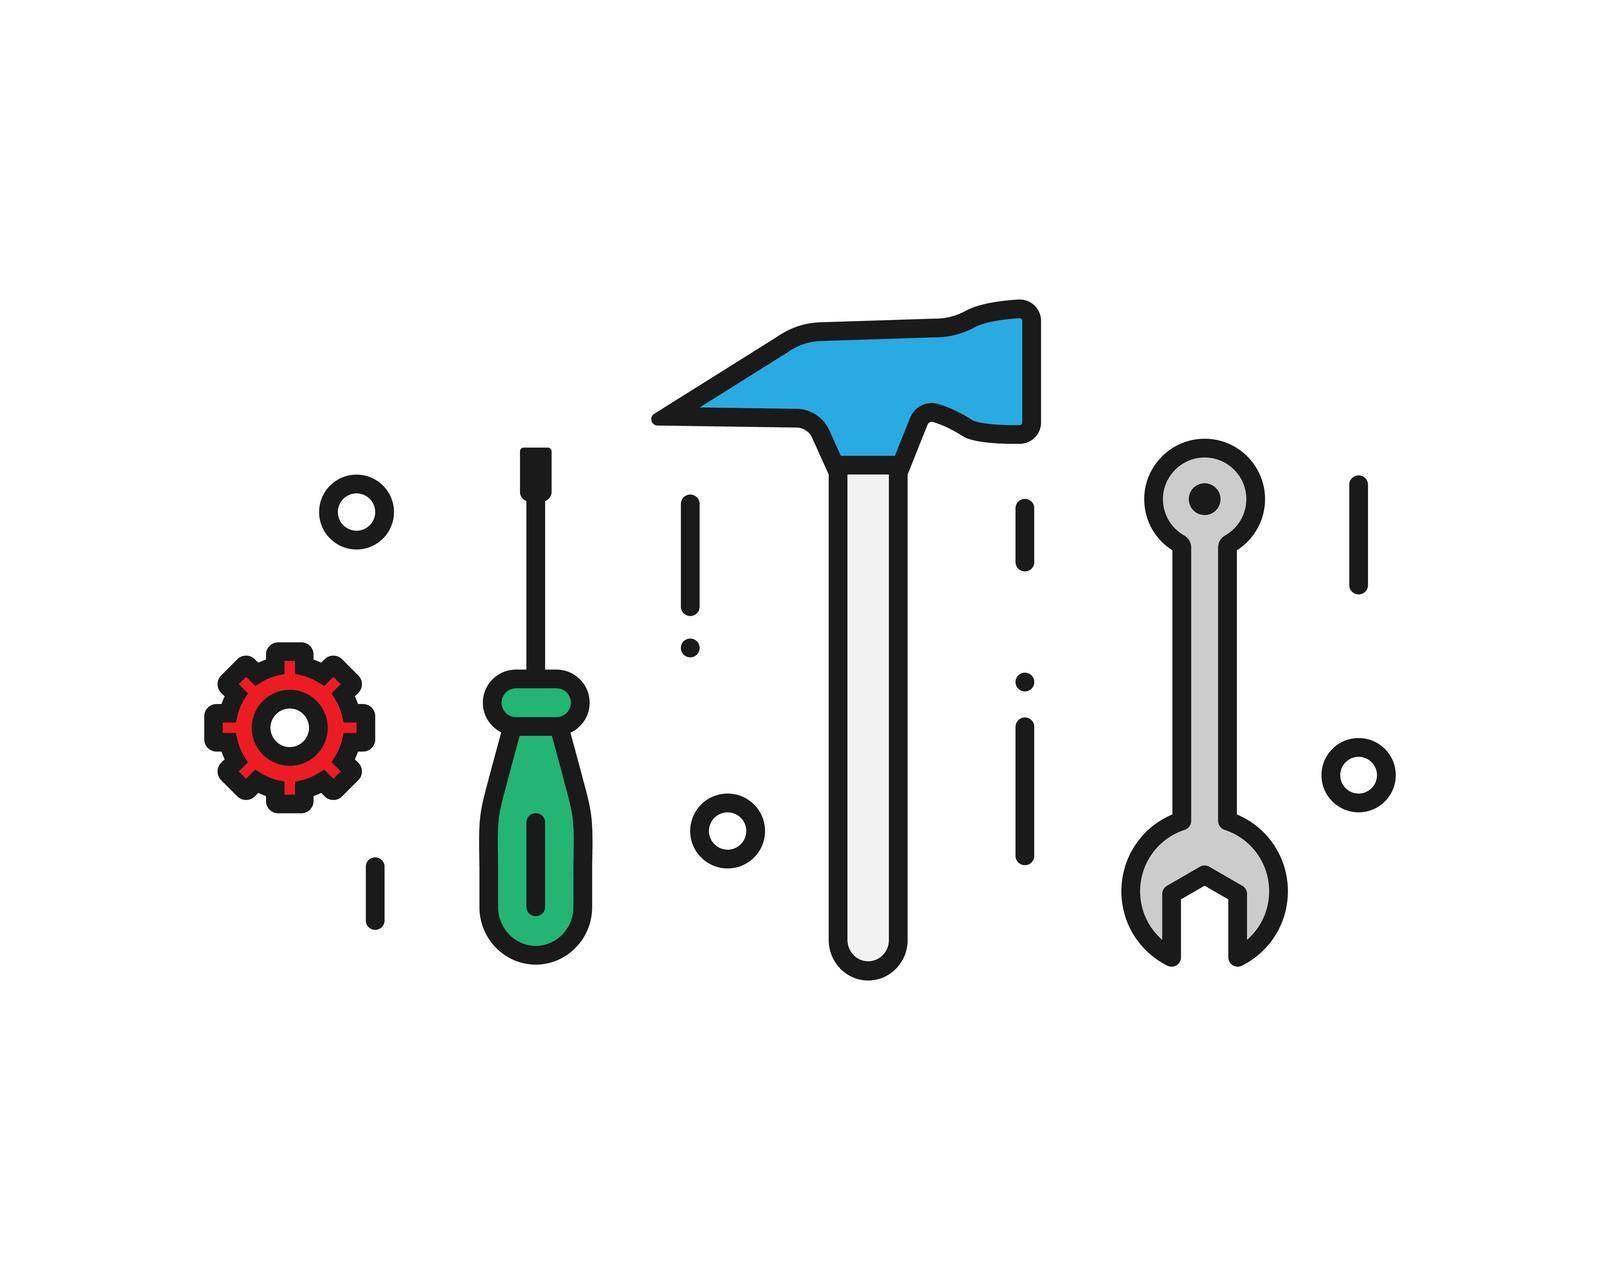 Home repair and construction tools concept illustration. Vector illustration EPS10 by TopRated